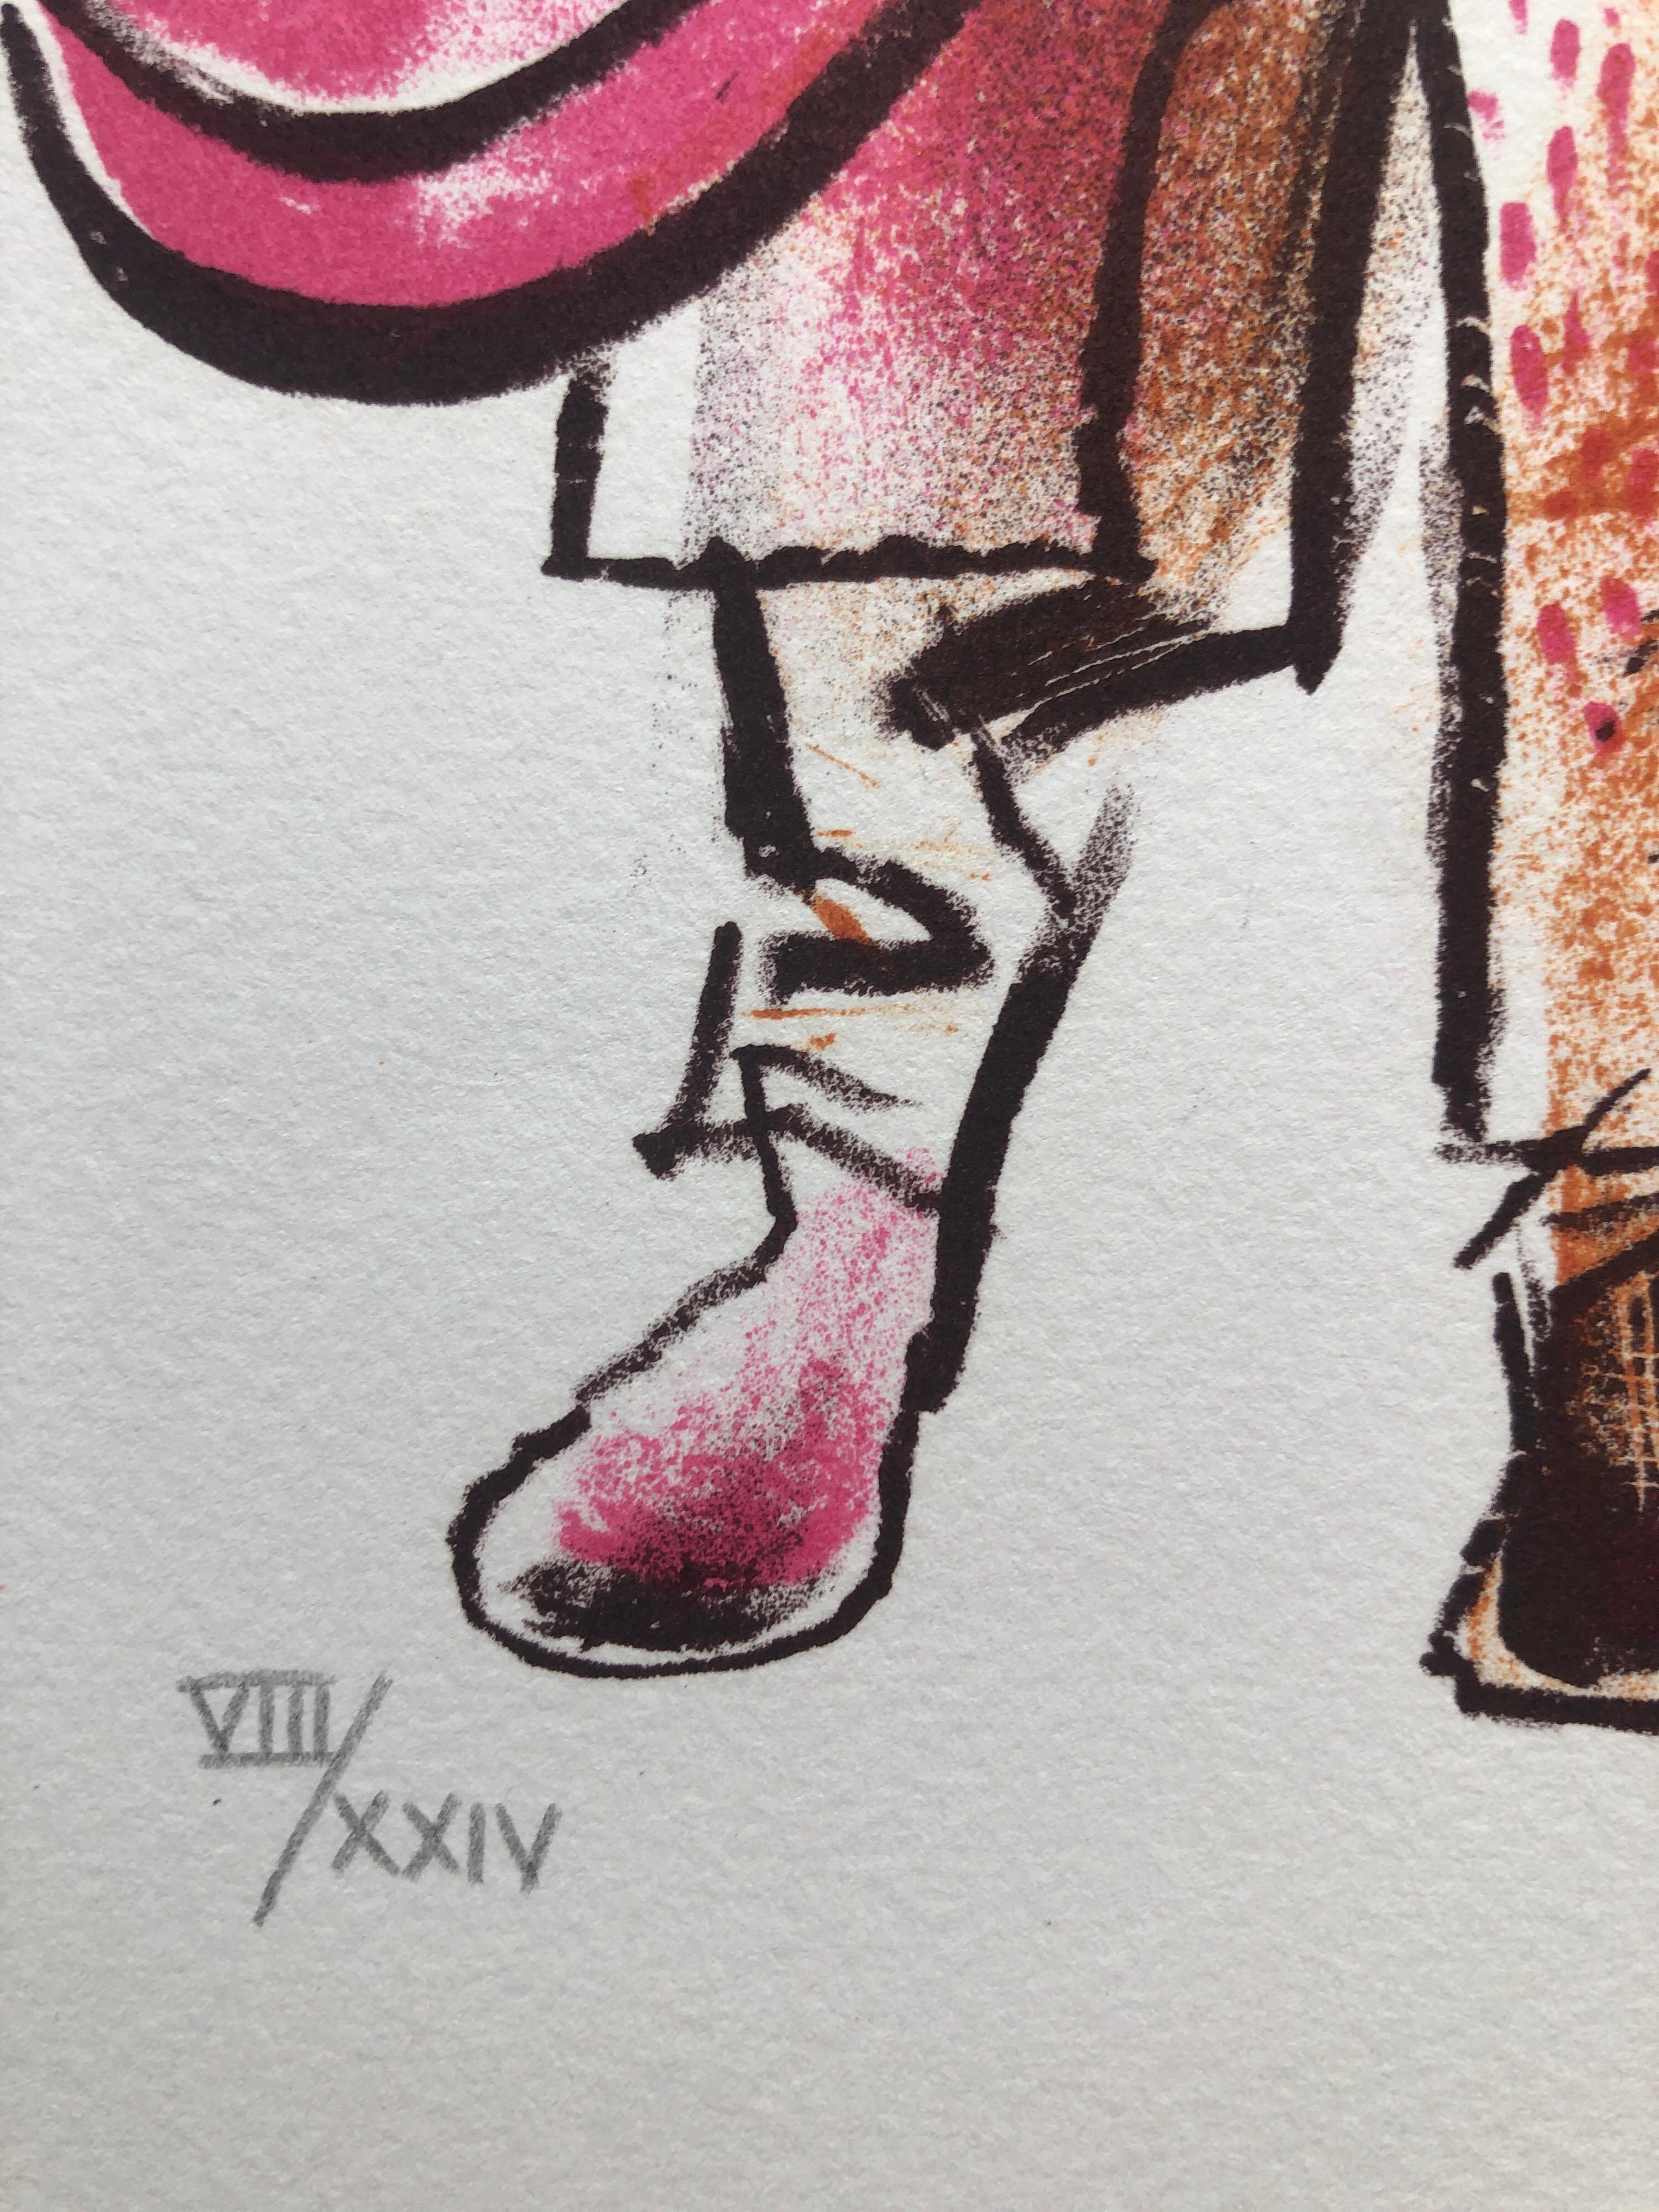 
Hand signed in pencil and numbered with Roman numerals 8/24. A very small edition.
Old Lower East Side of New York or East European Shtetl. Jewish Shtetl Peddler Merchant. humorous Yiddish art.
The New-York born artist William Gropper was a painter